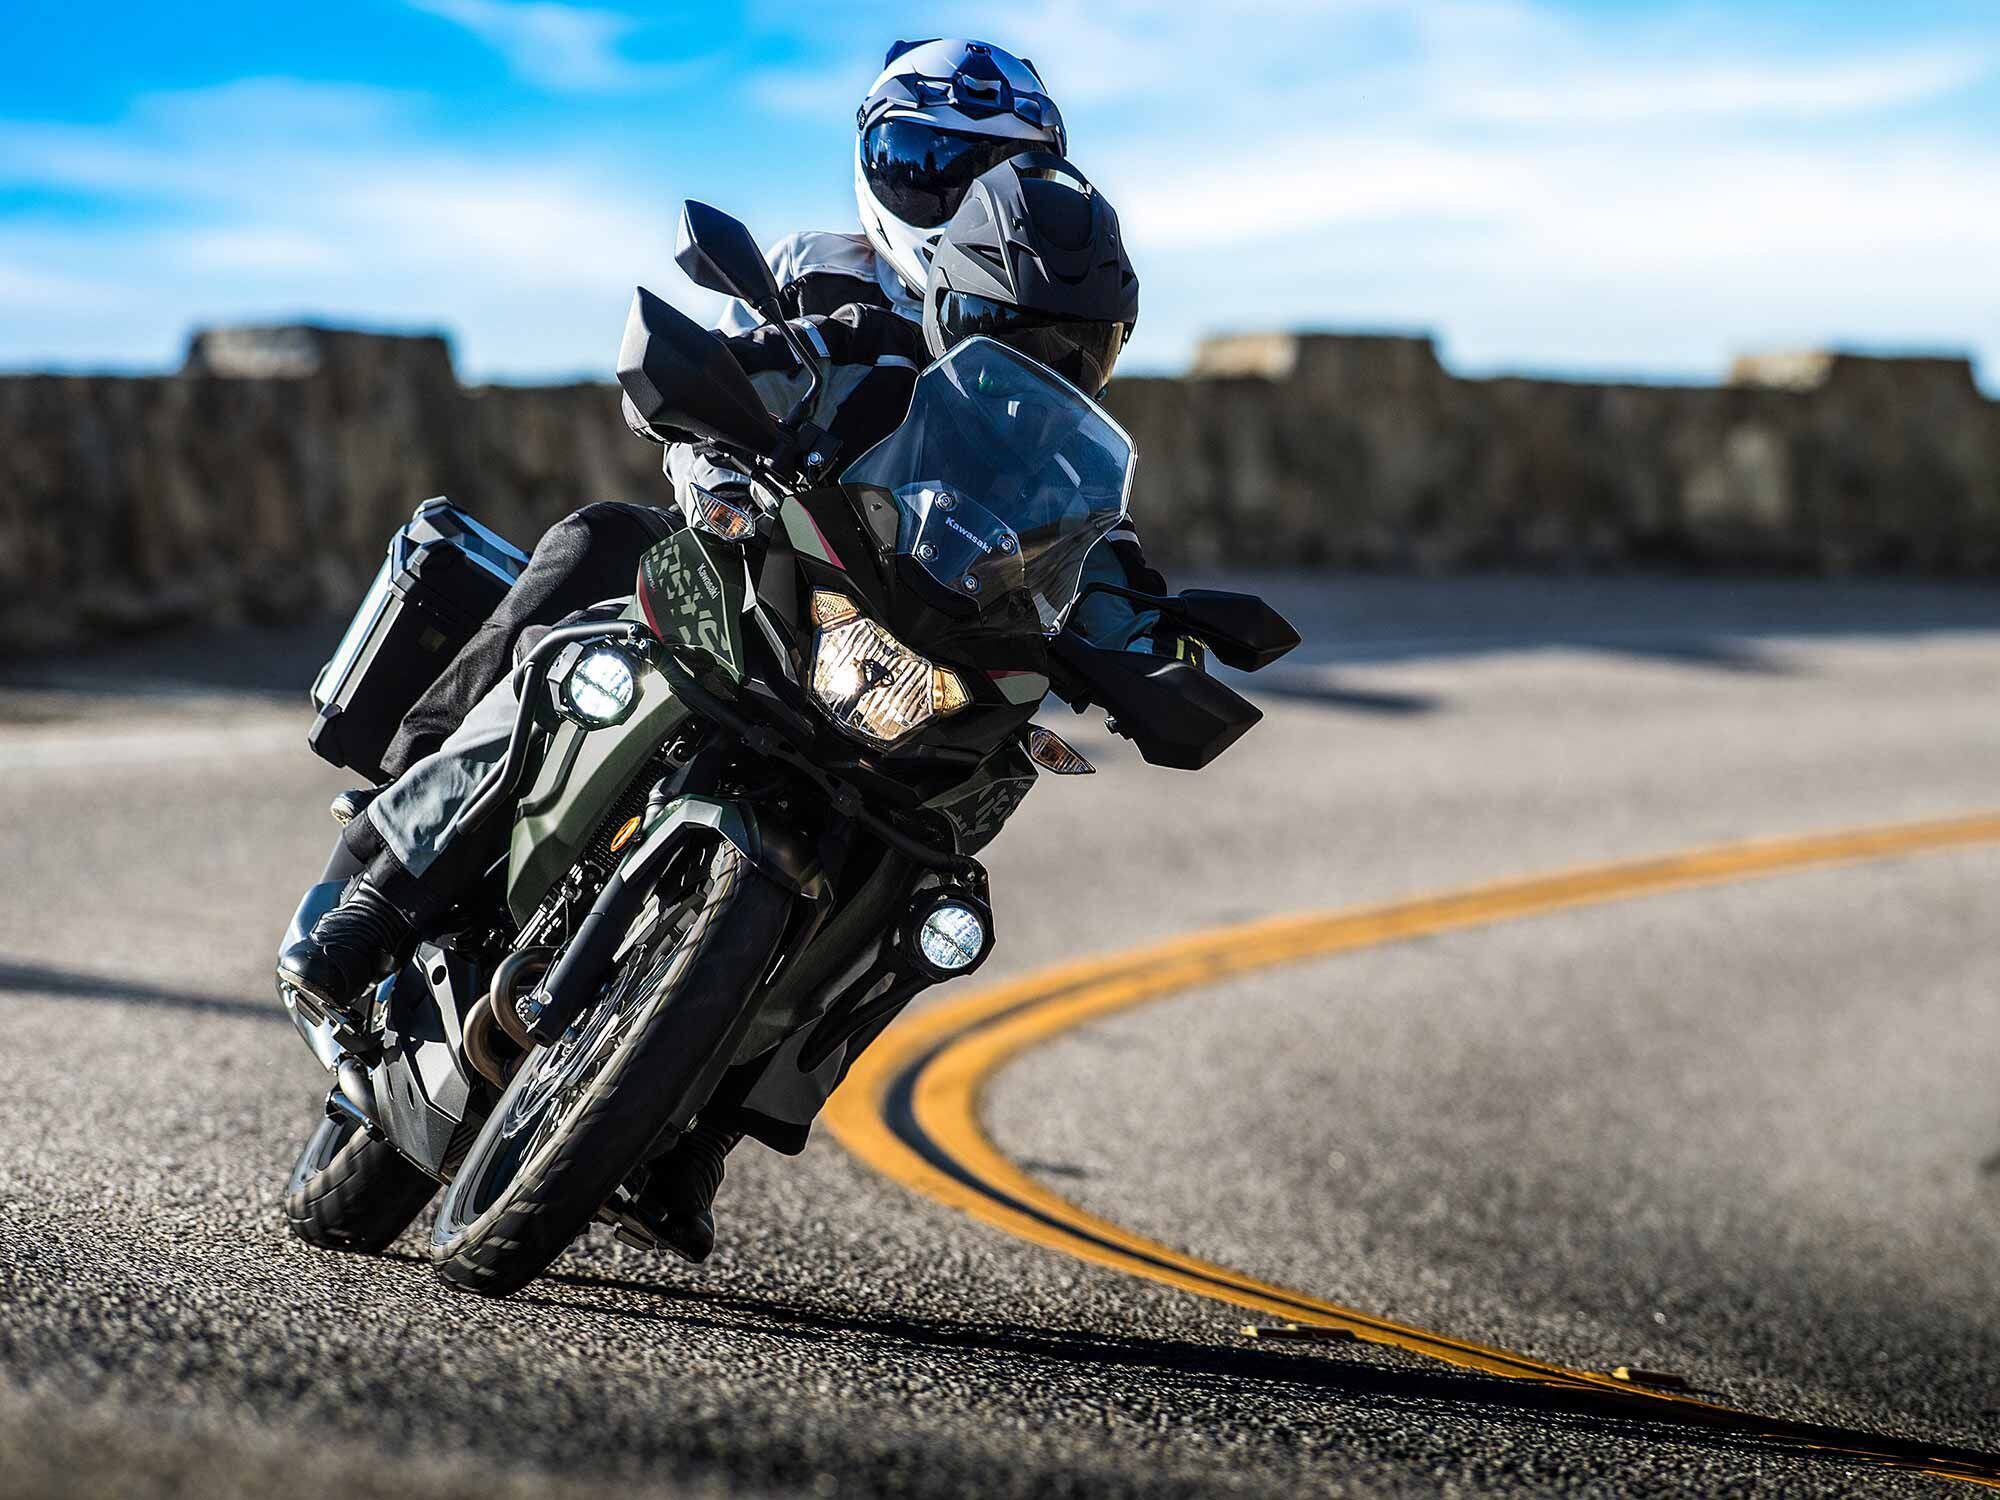 A 17-liter hard saddlebag set, hand guards, and auxiliary lighting kit are optional accessories for the Versys.